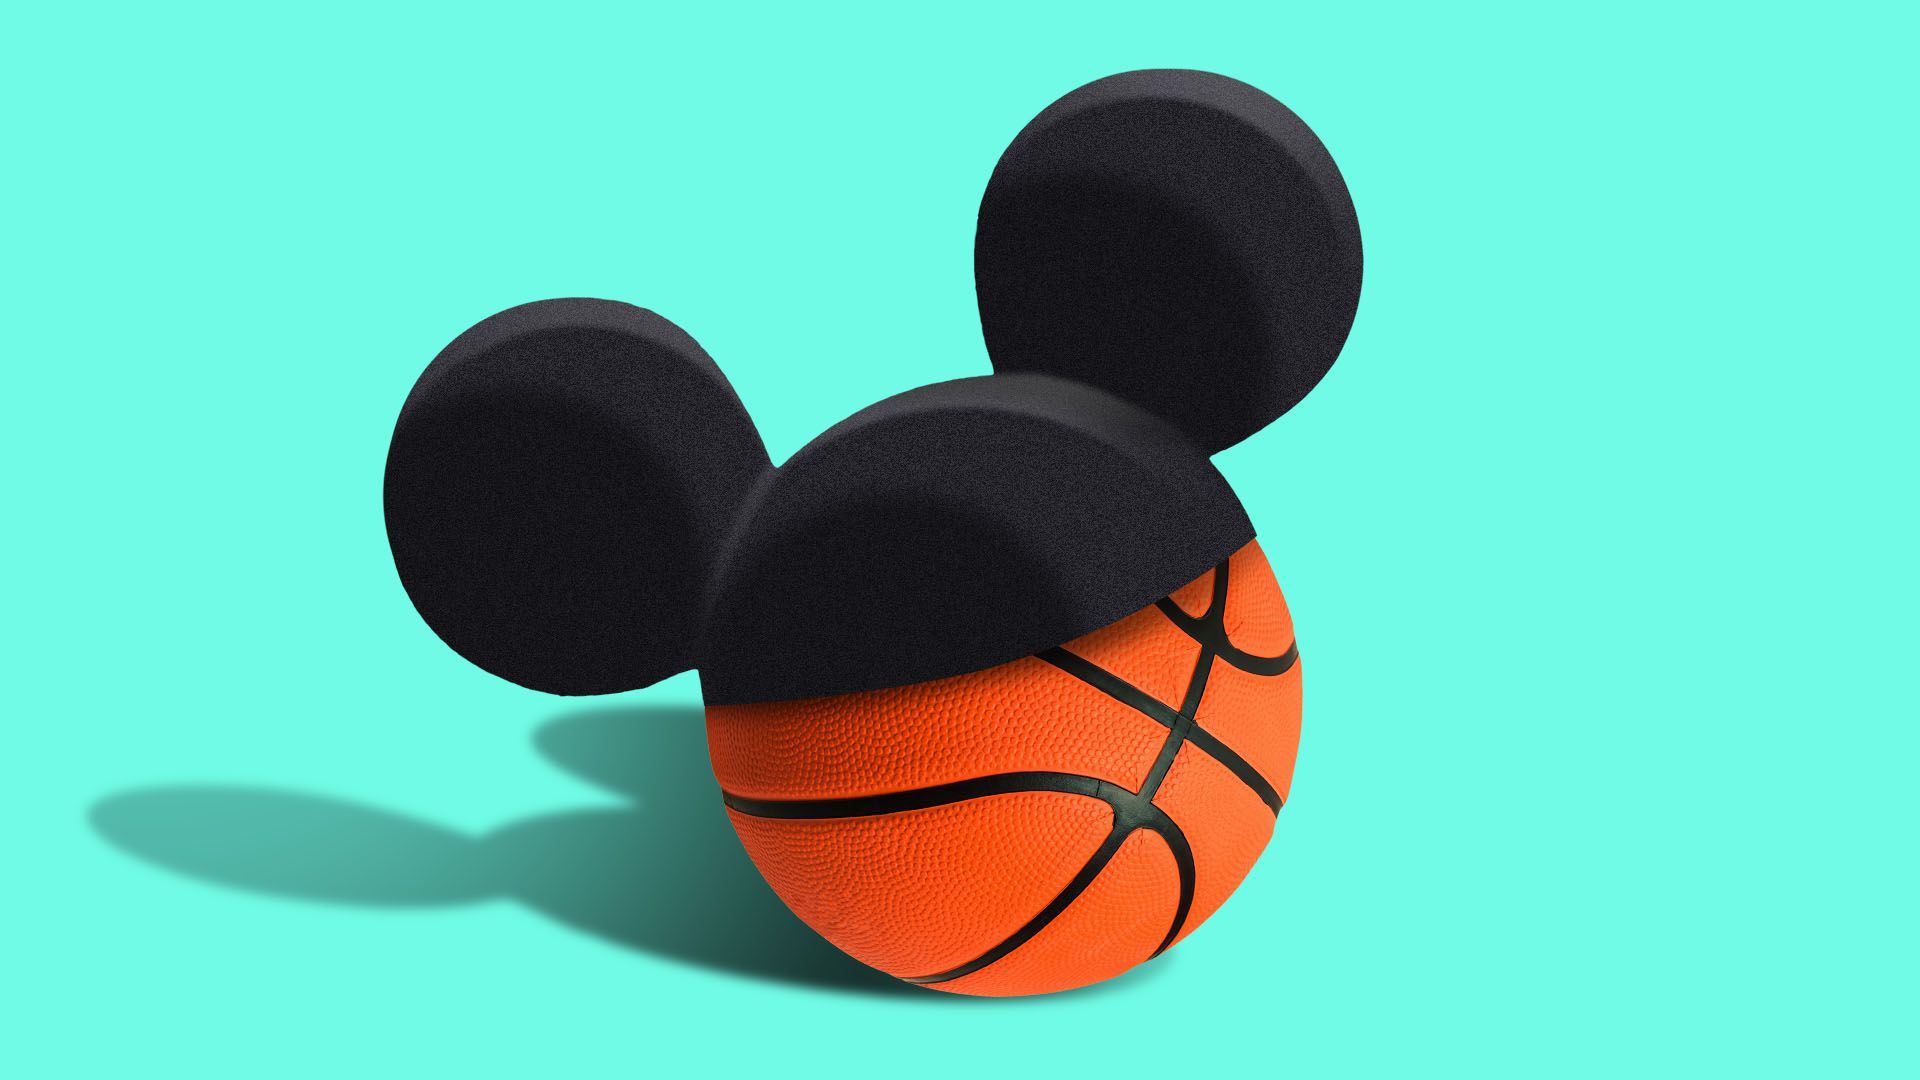 Illustration of a basketball wearing a mickey mouse ear hat